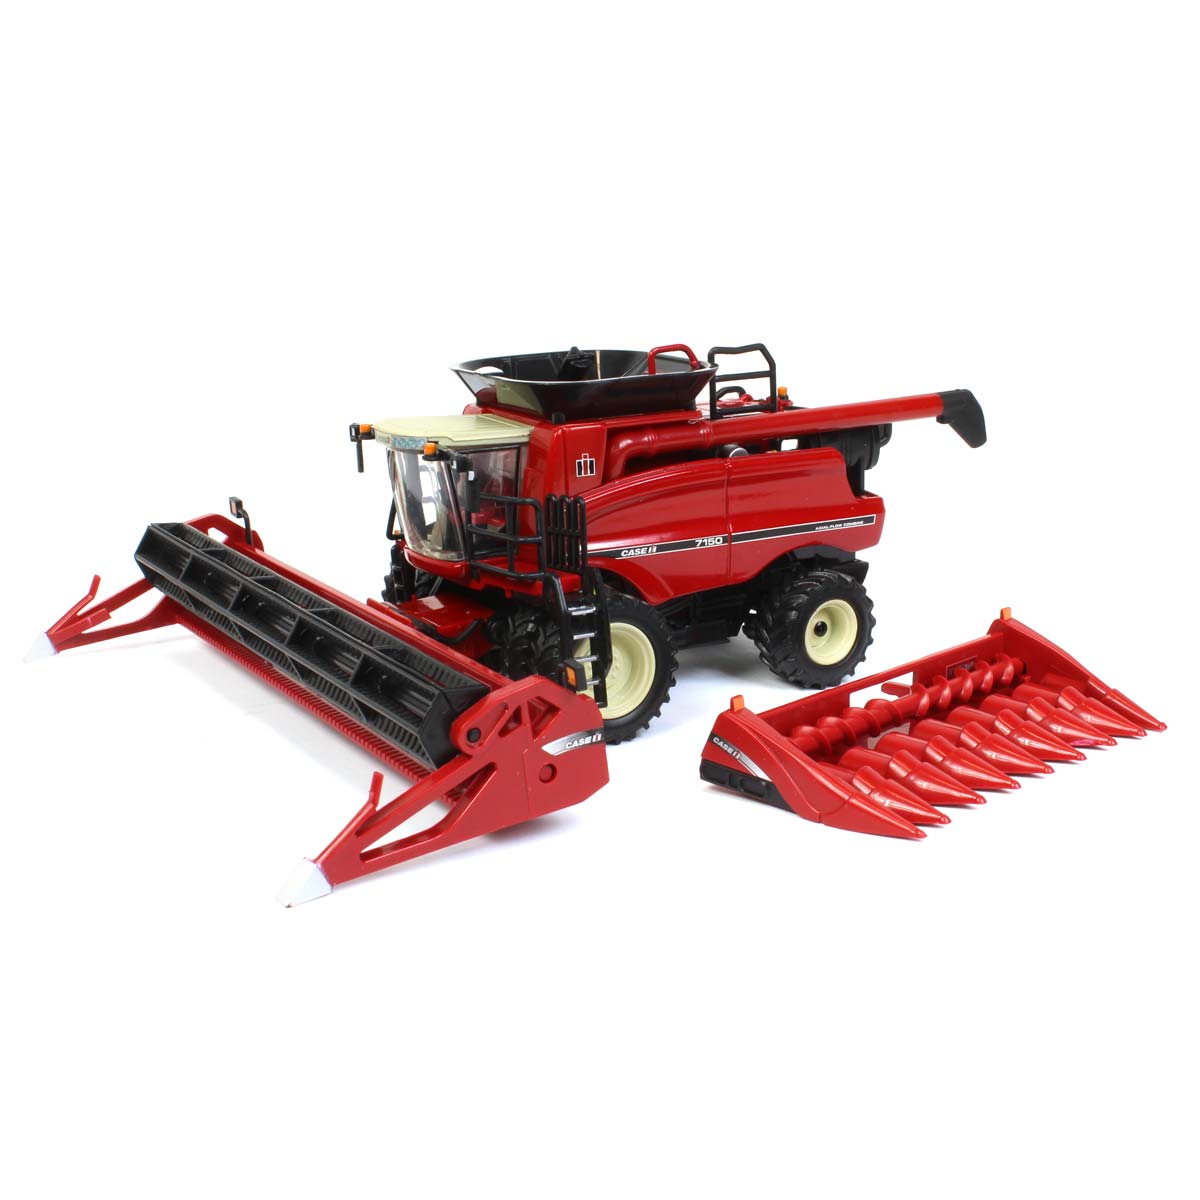 1/64 Limited Edition Vintage IH-Case IH 7150 Combine With Corn And Grain Header